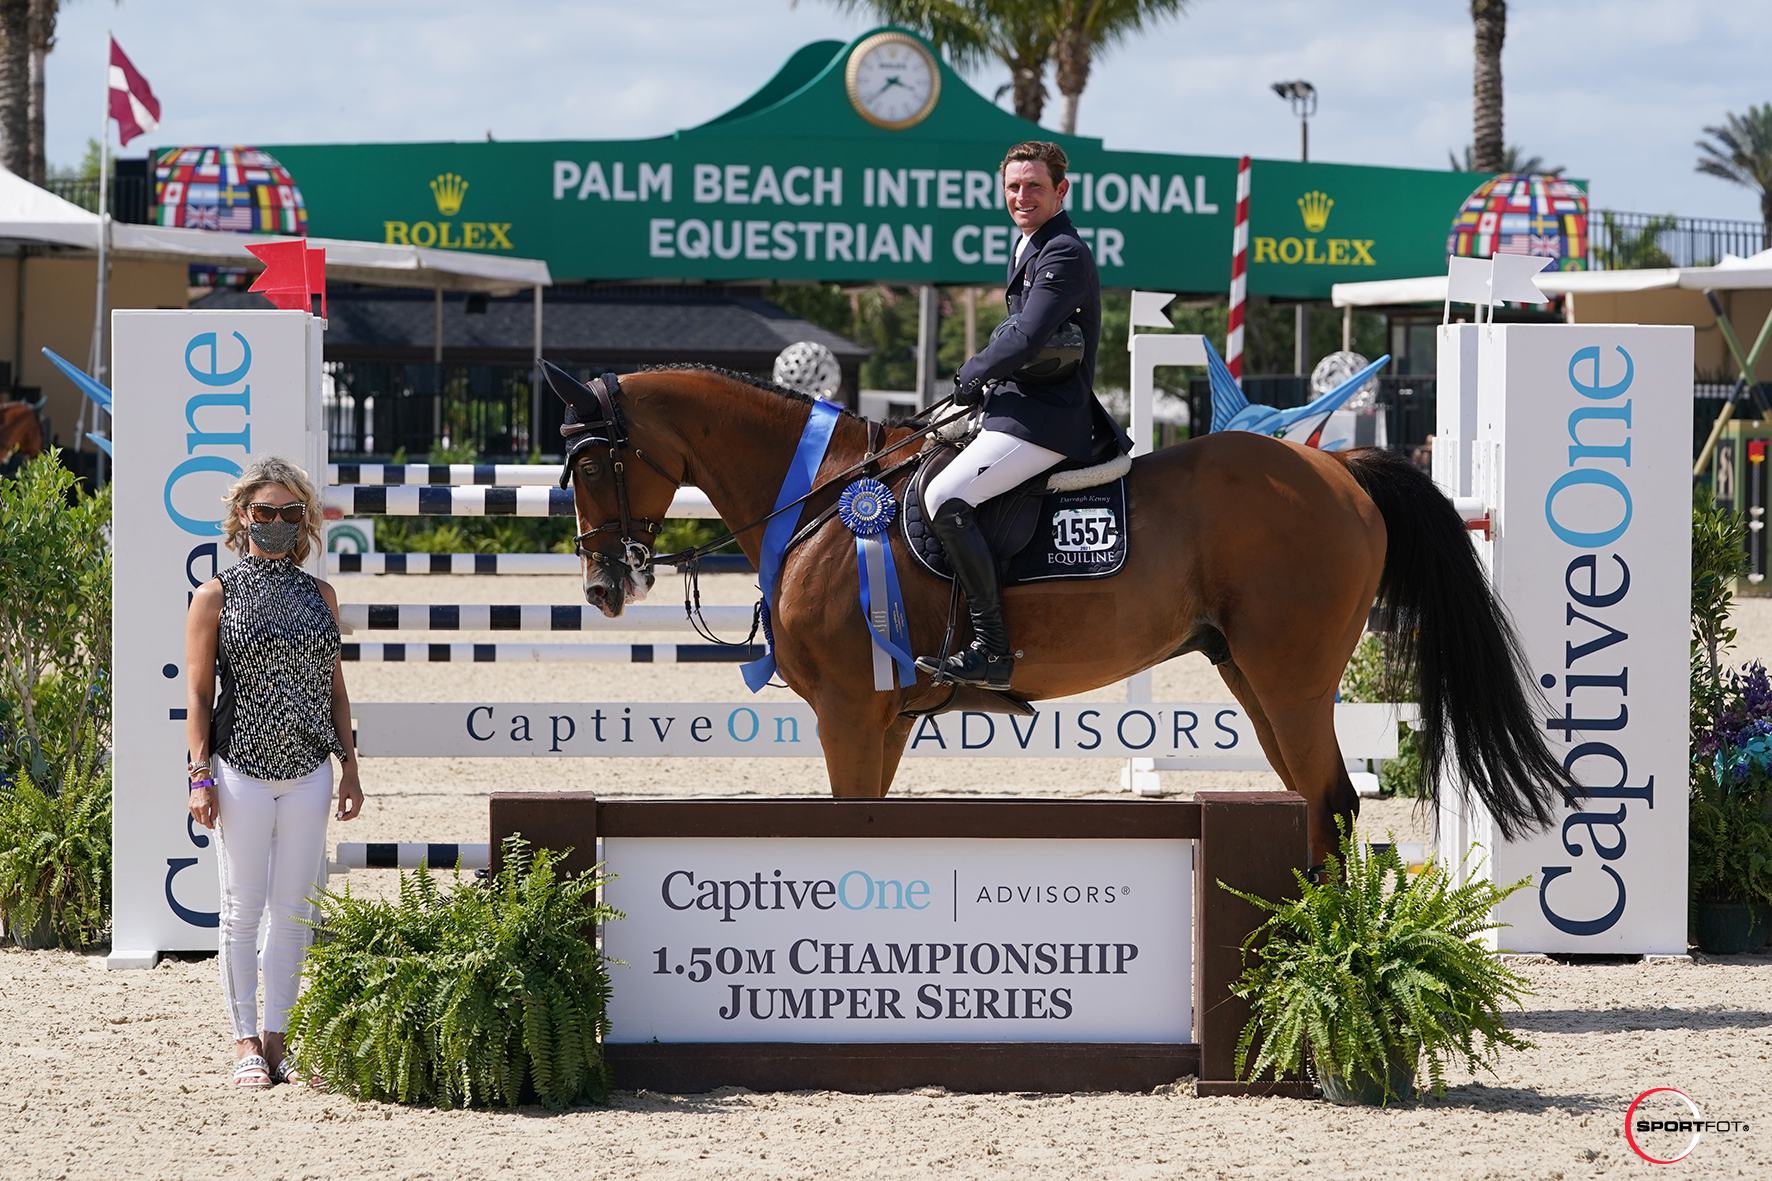 Darragh Kenny is King, Extending Series Lead After Winning the $50,000 CaptiveOne Advisors 1.50m Grand Prix